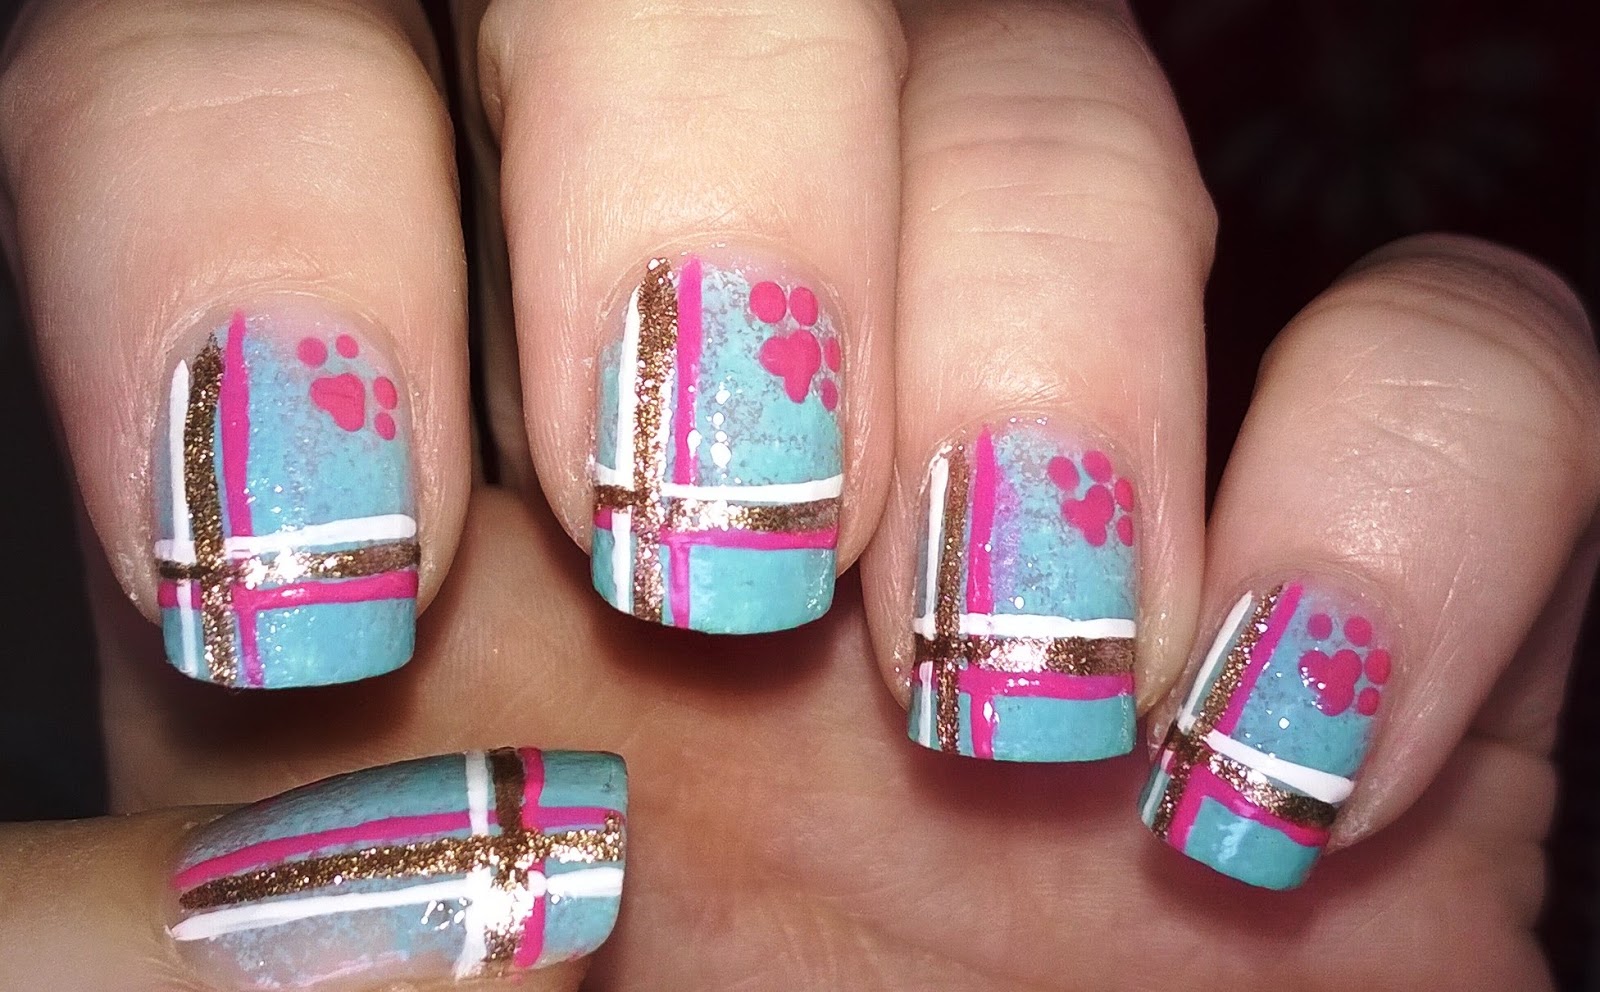 3. Trendy Nail Art Designs for Girls - wide 8